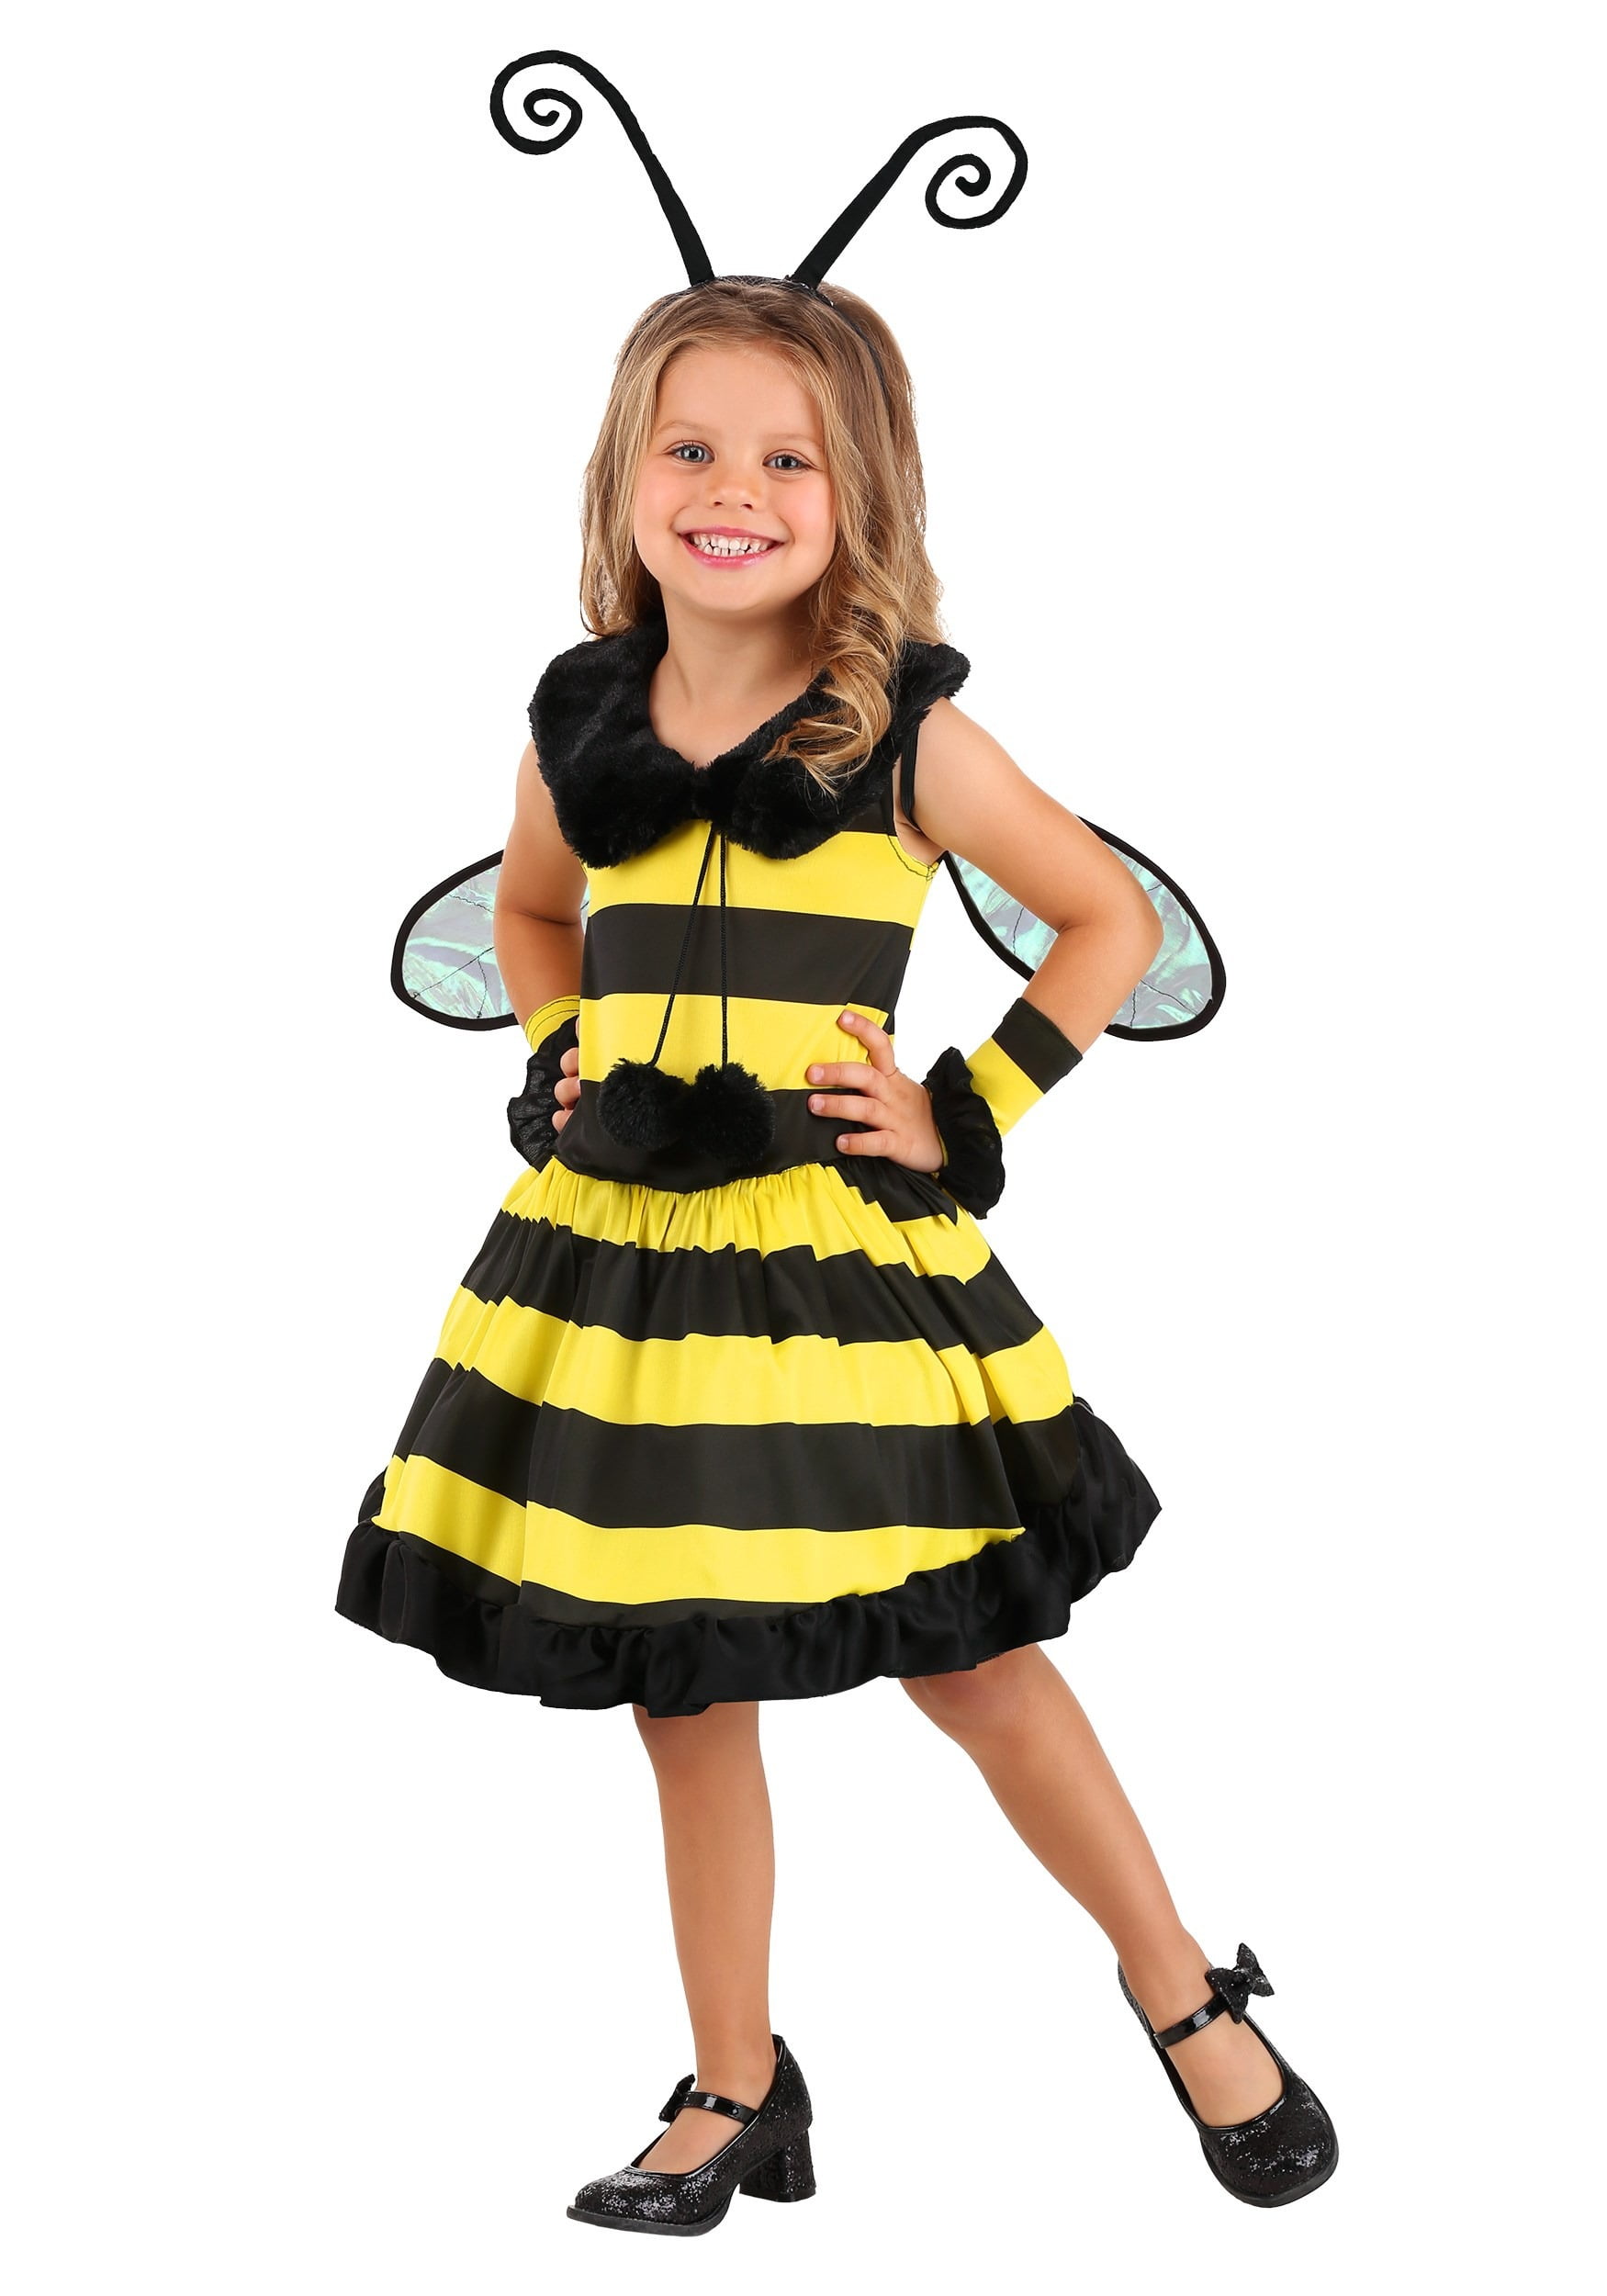 Details about   Toddler Girls Bumblebee Costume 